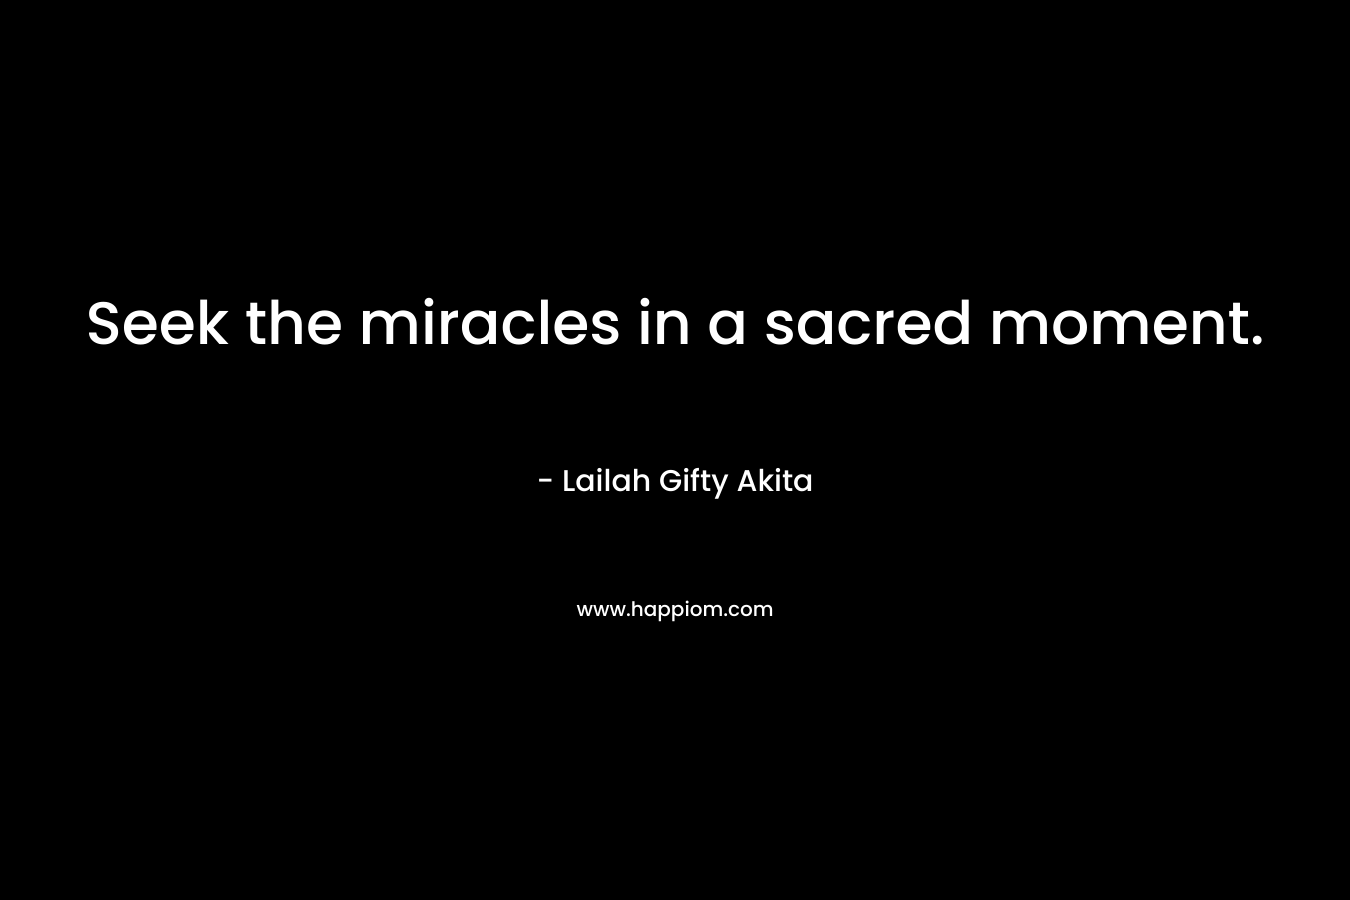 Seek the miracles in a sacred moment.